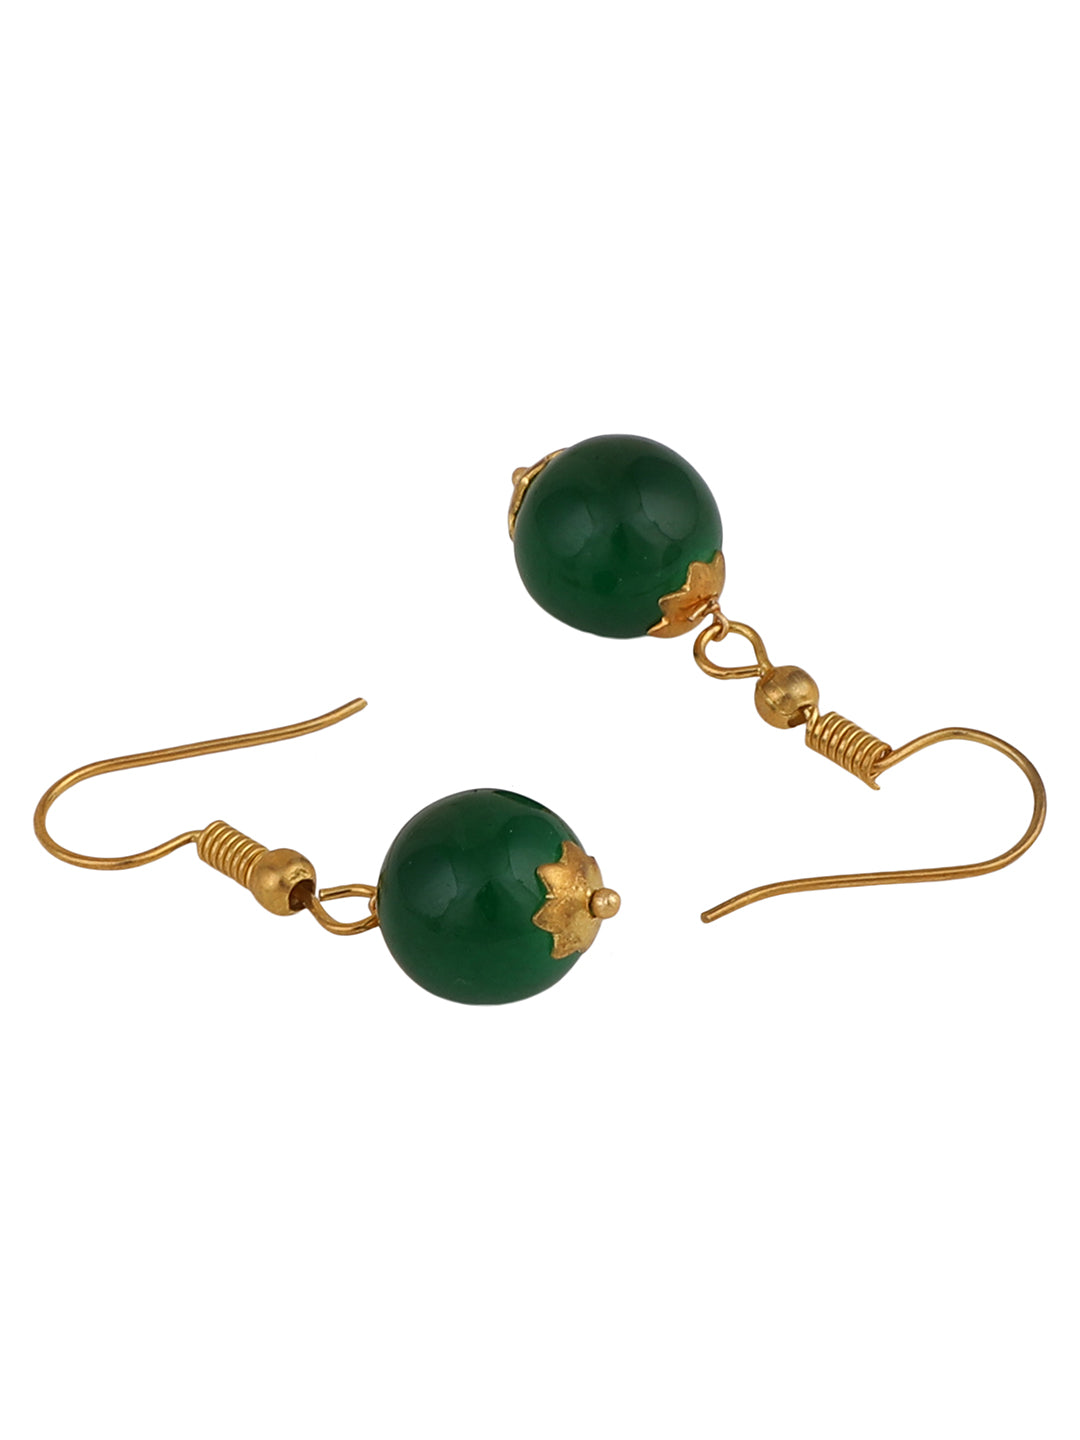 Women's Gold Plated  Green Pearl  Jewellery Set - Anikas Creation